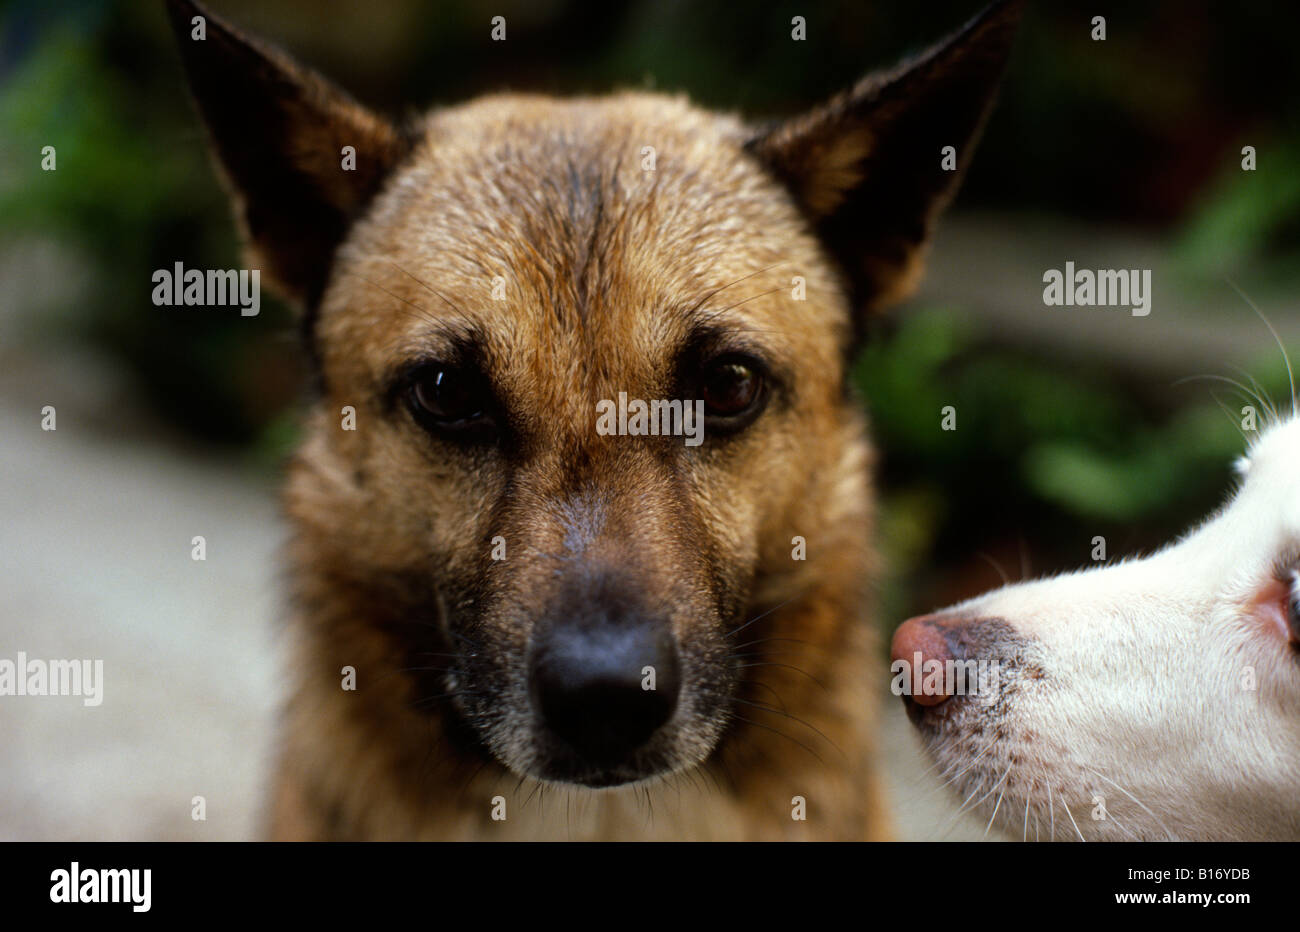 White female dog sniffing wet brown and black male dog's nose. Stock Photo